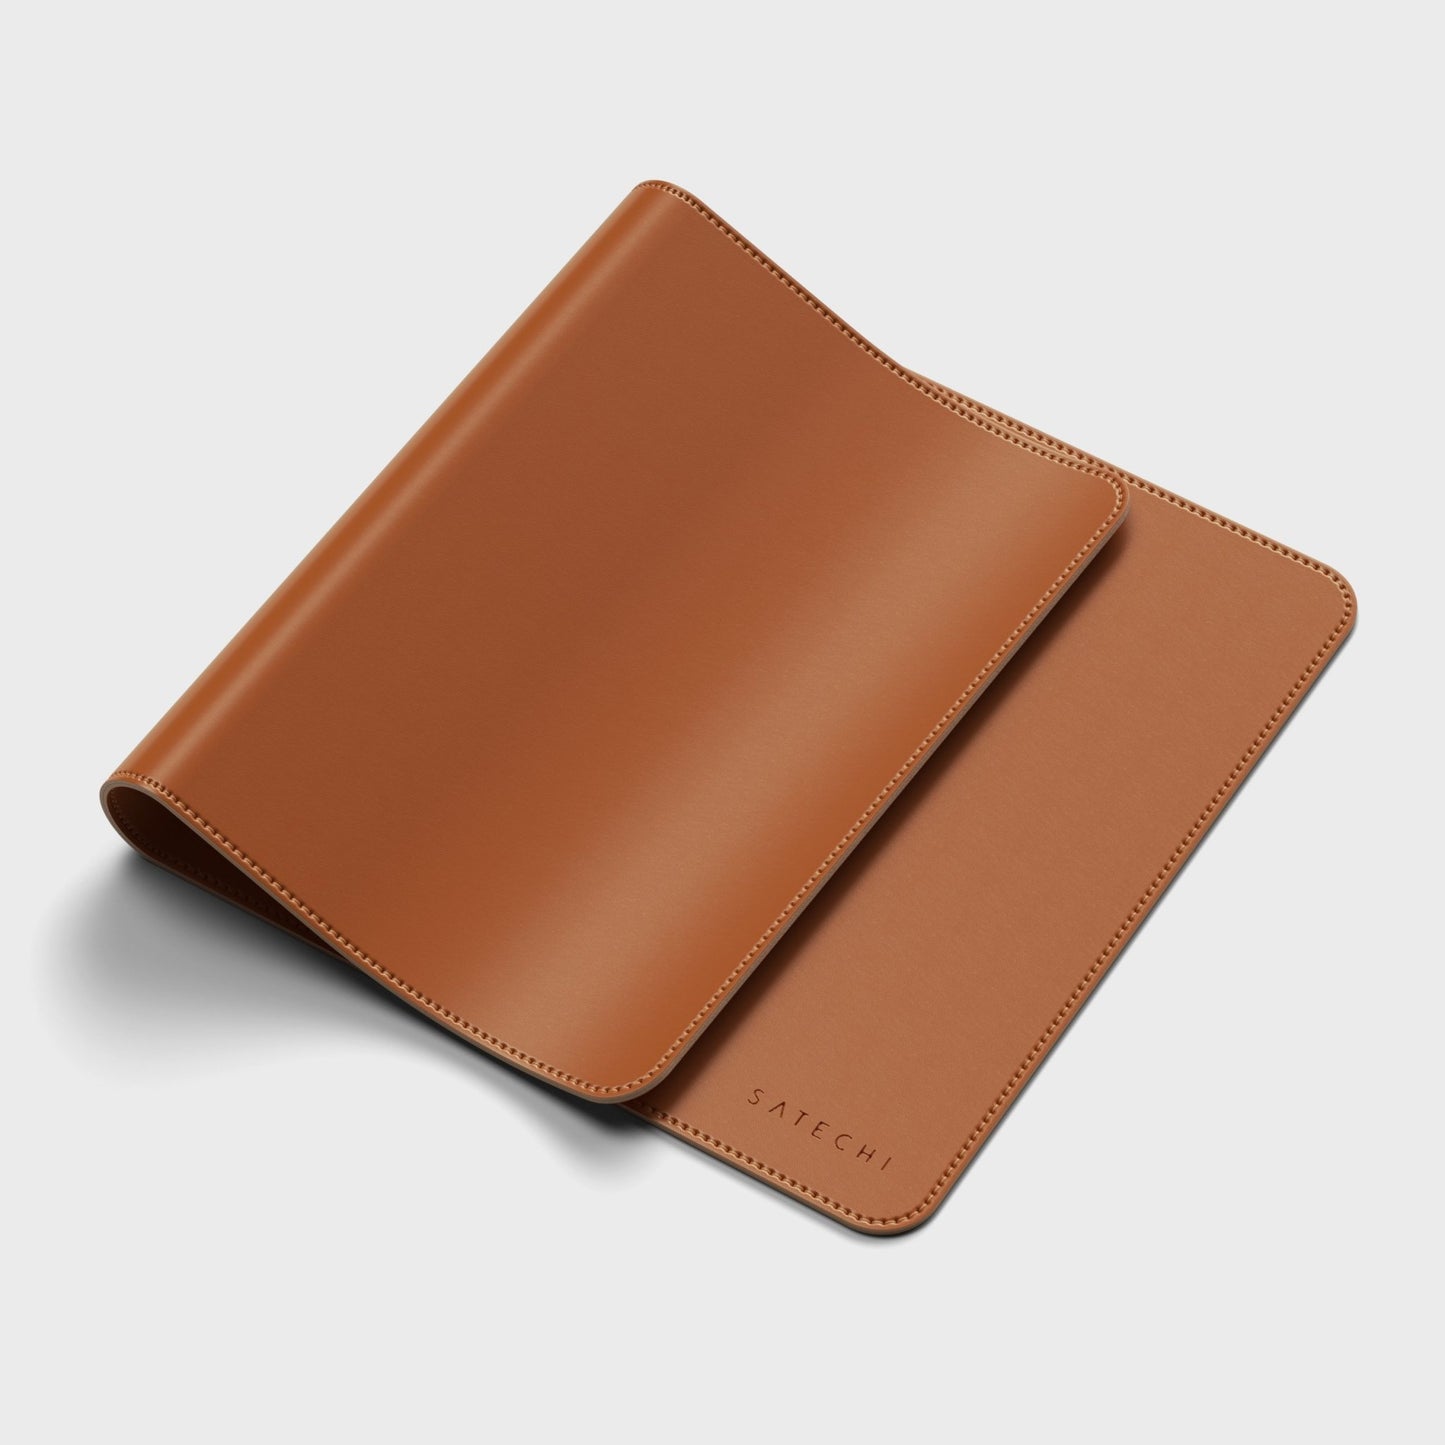 Satechi Eco-Leather Deskmate-Goodnotes.no